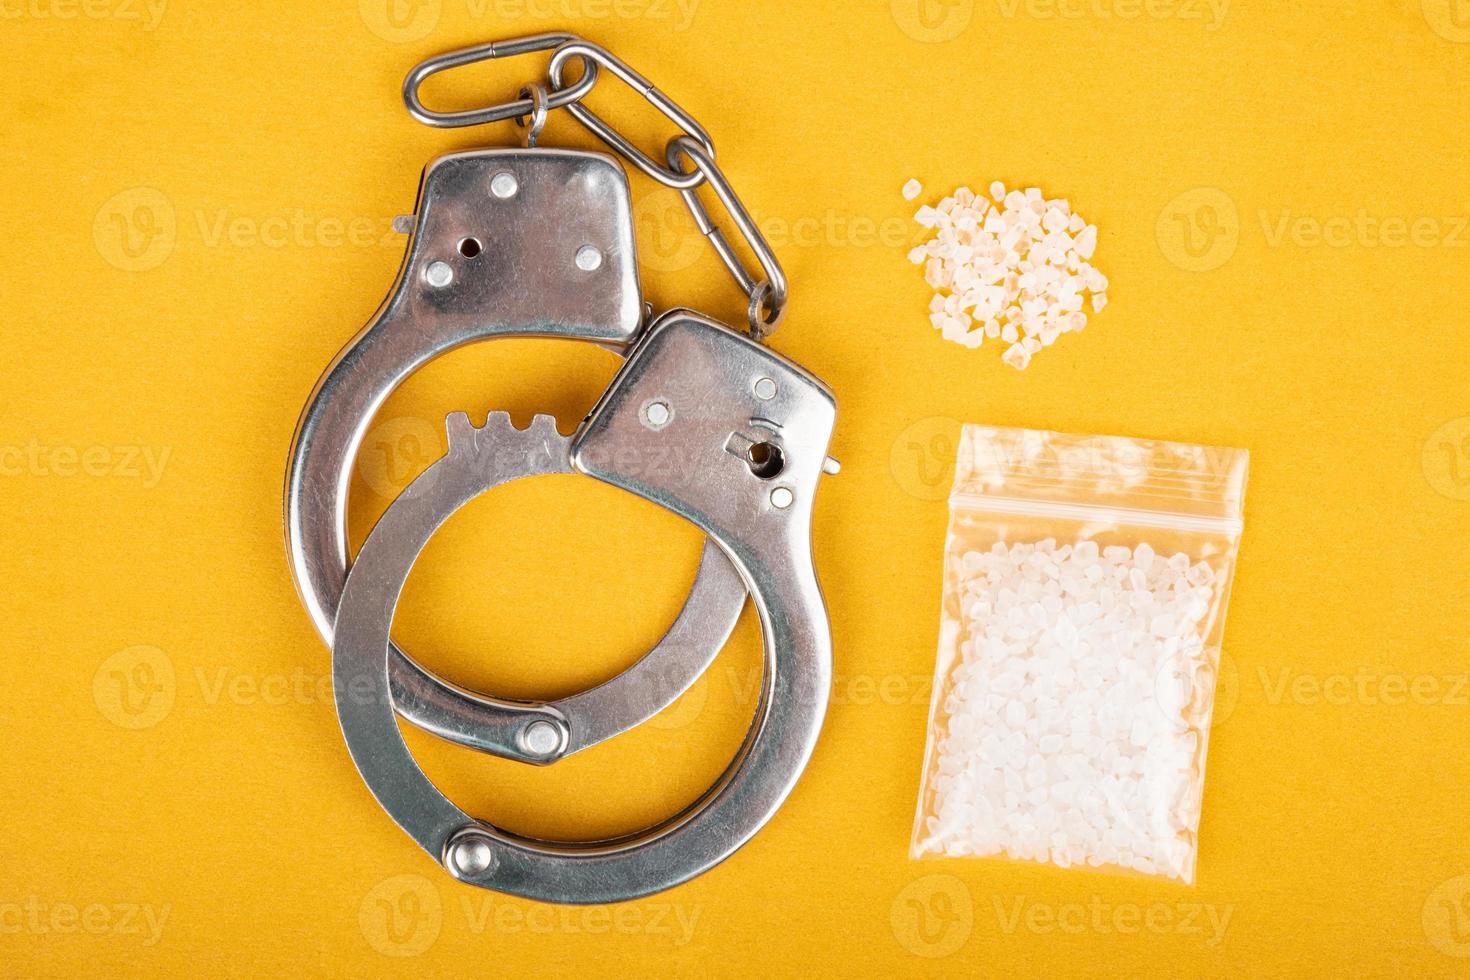 Crystal drugs and handcuffs on yellow background, white powder drug trafficking. photo